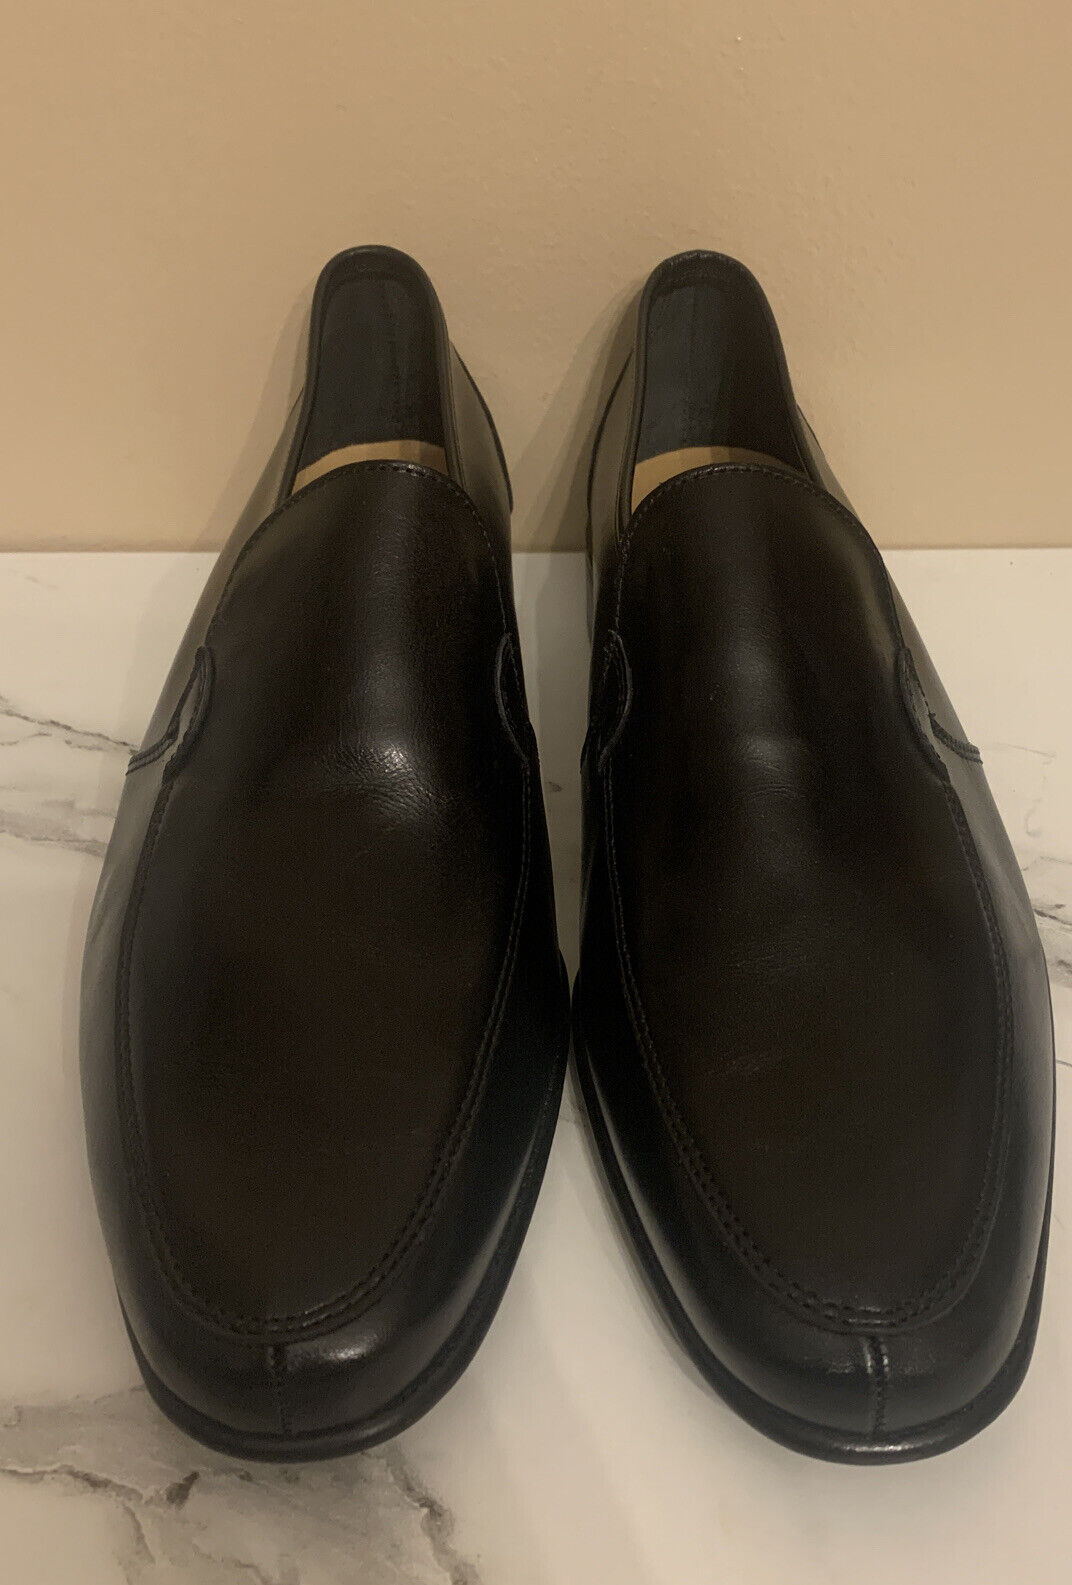 Bally Mens Shoes Caddo Black Leather Loafers  Size US 8.5 Slip On Business Work